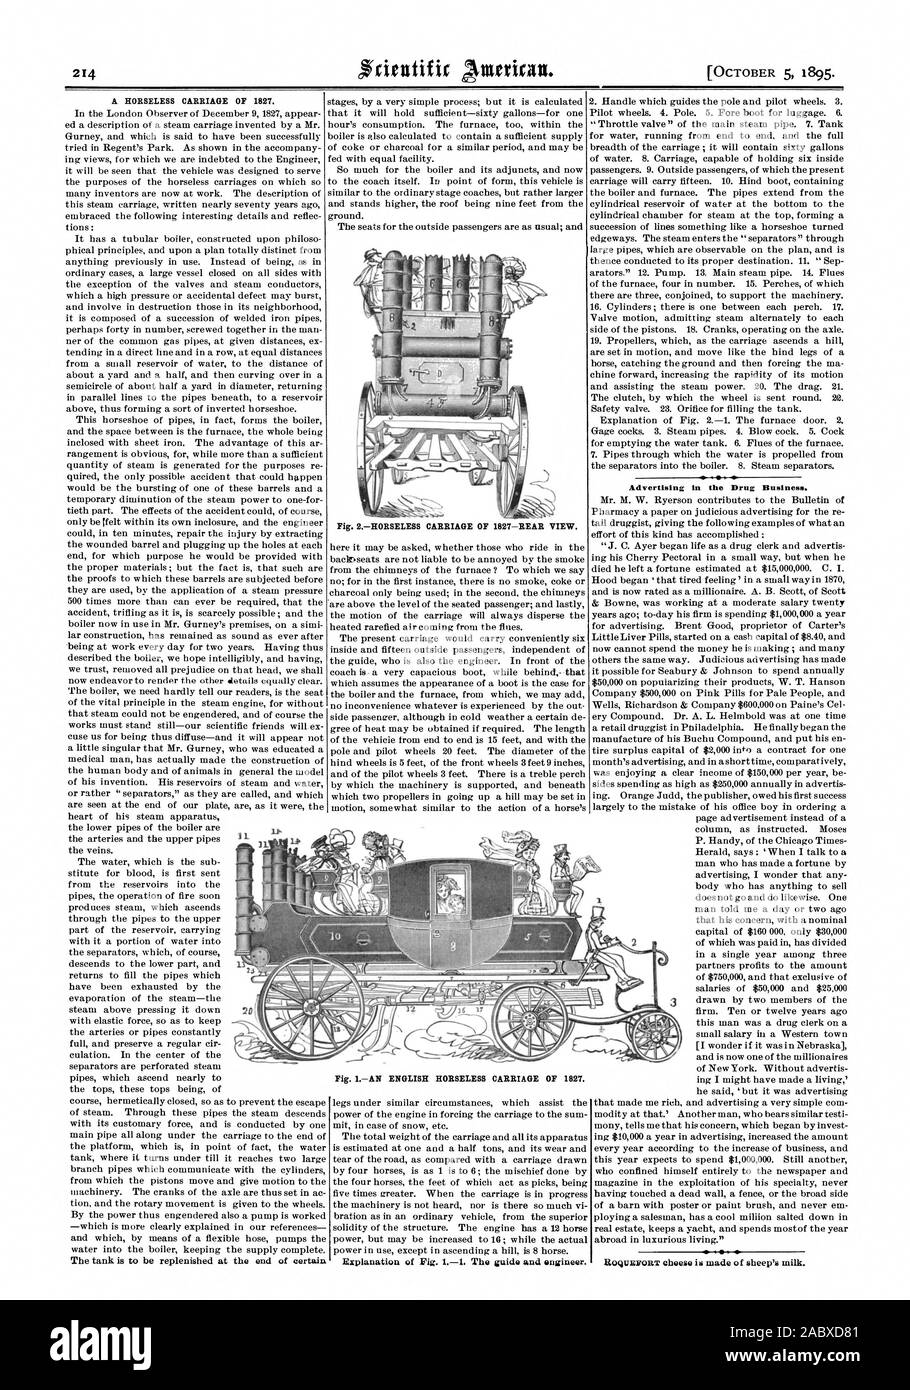 OCTOBER 5 1895.  A HORSELESS CARRIAGE OF 1827. Advertising in the Drug Business. e - ' slikg I 1r Fig. 1.-AN ENGLISH HOMELESS CARRIAGE OF 1827., scientific american, 1895-10-05 Stock Photo